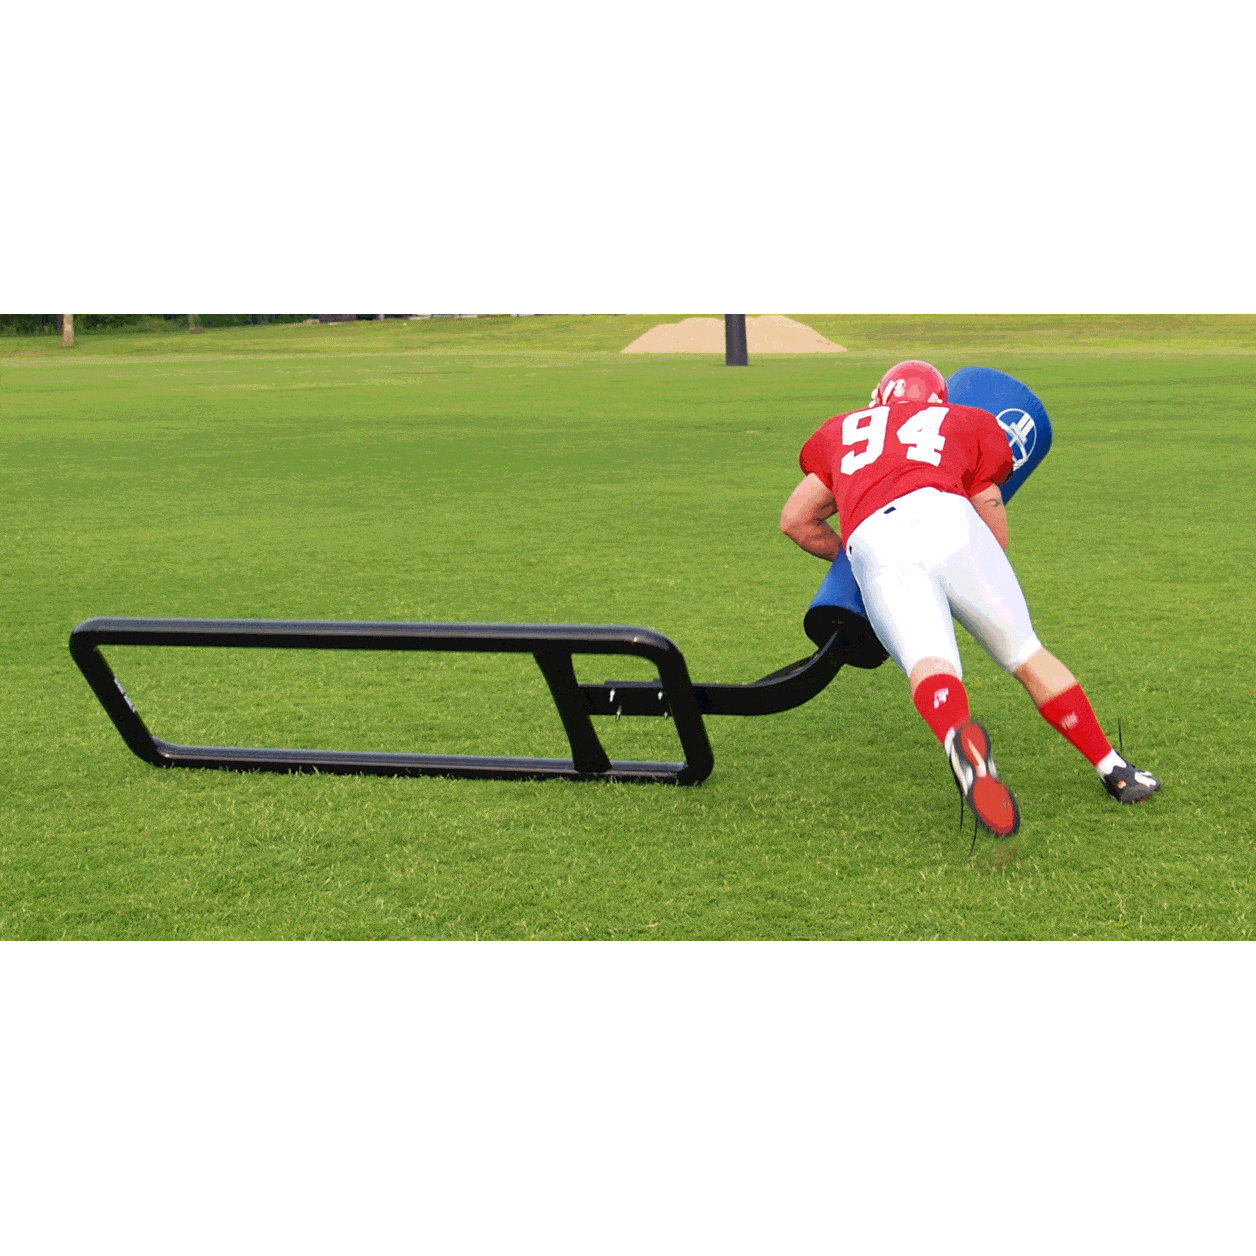 Fisher Sackback Tackle Sled - Pitch Pro Direct